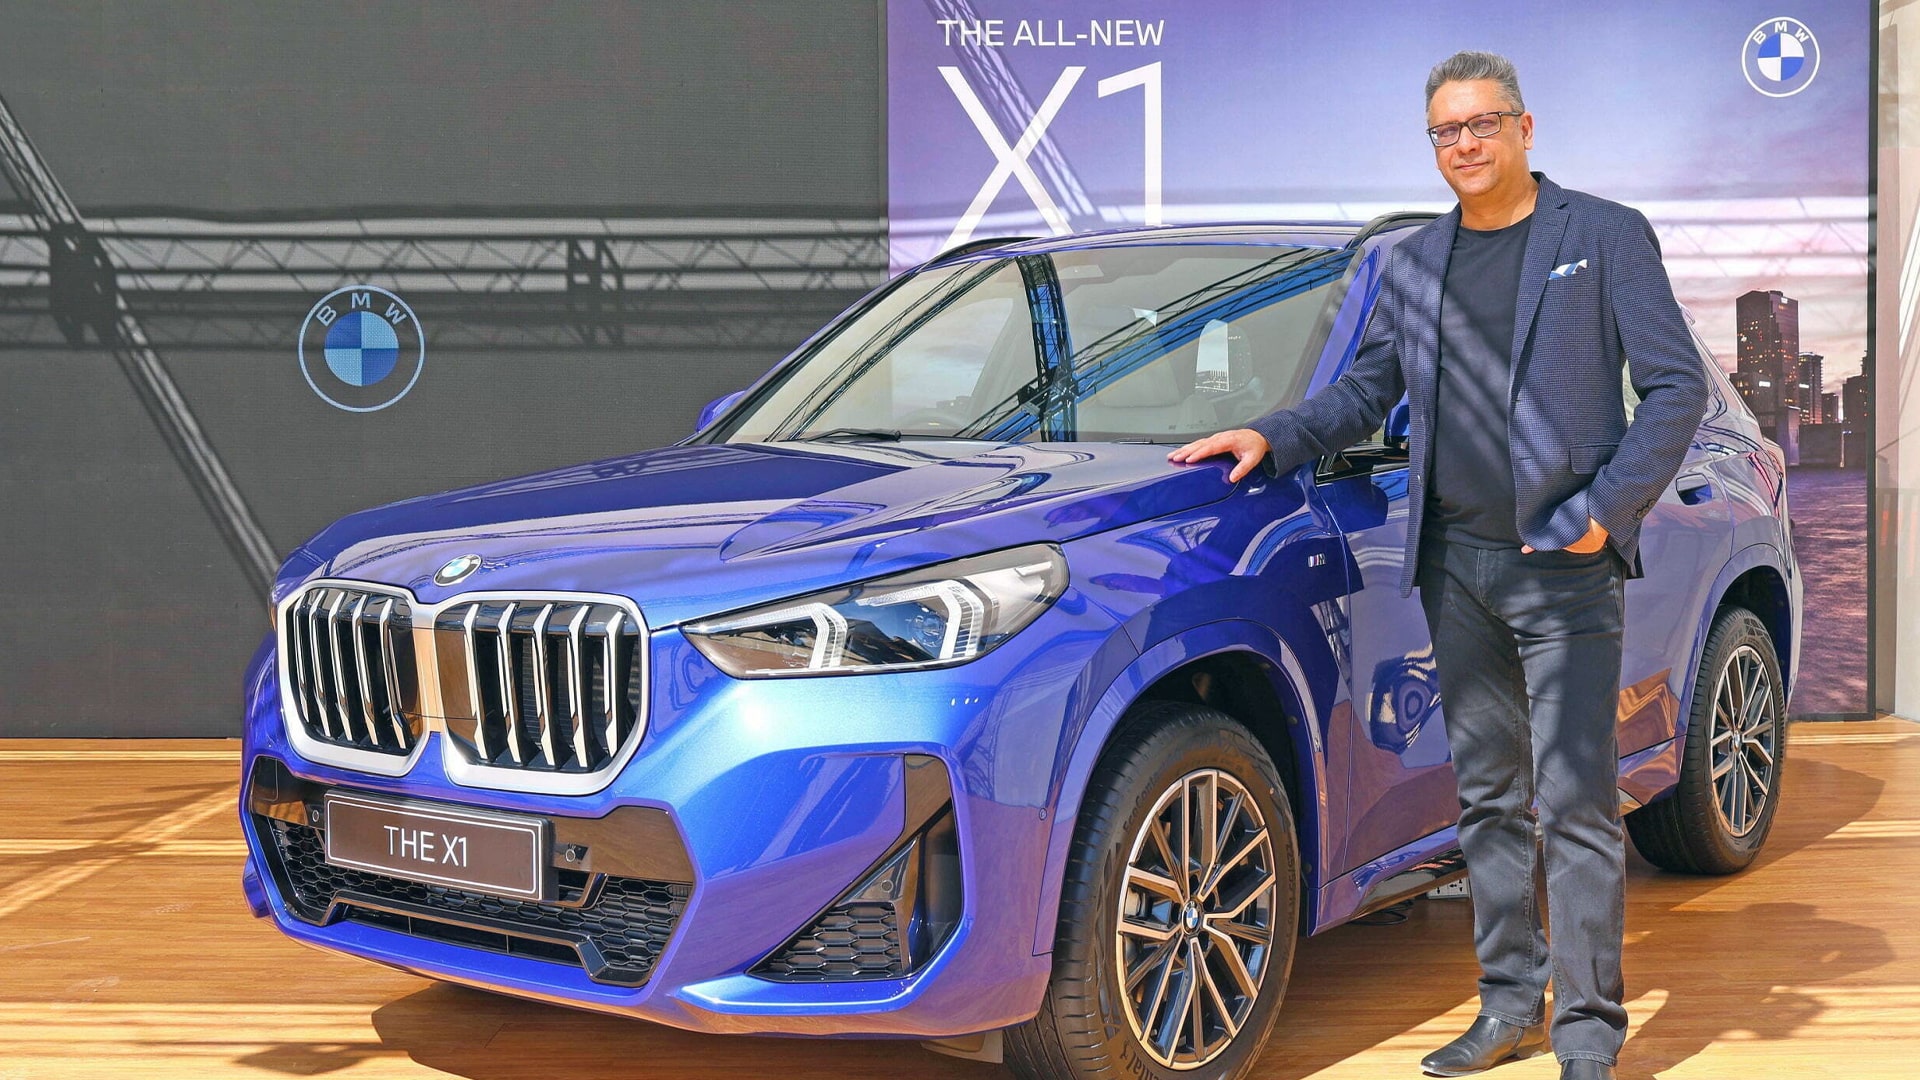 Xceed: Third Generation of the BMW X1 Launched in India